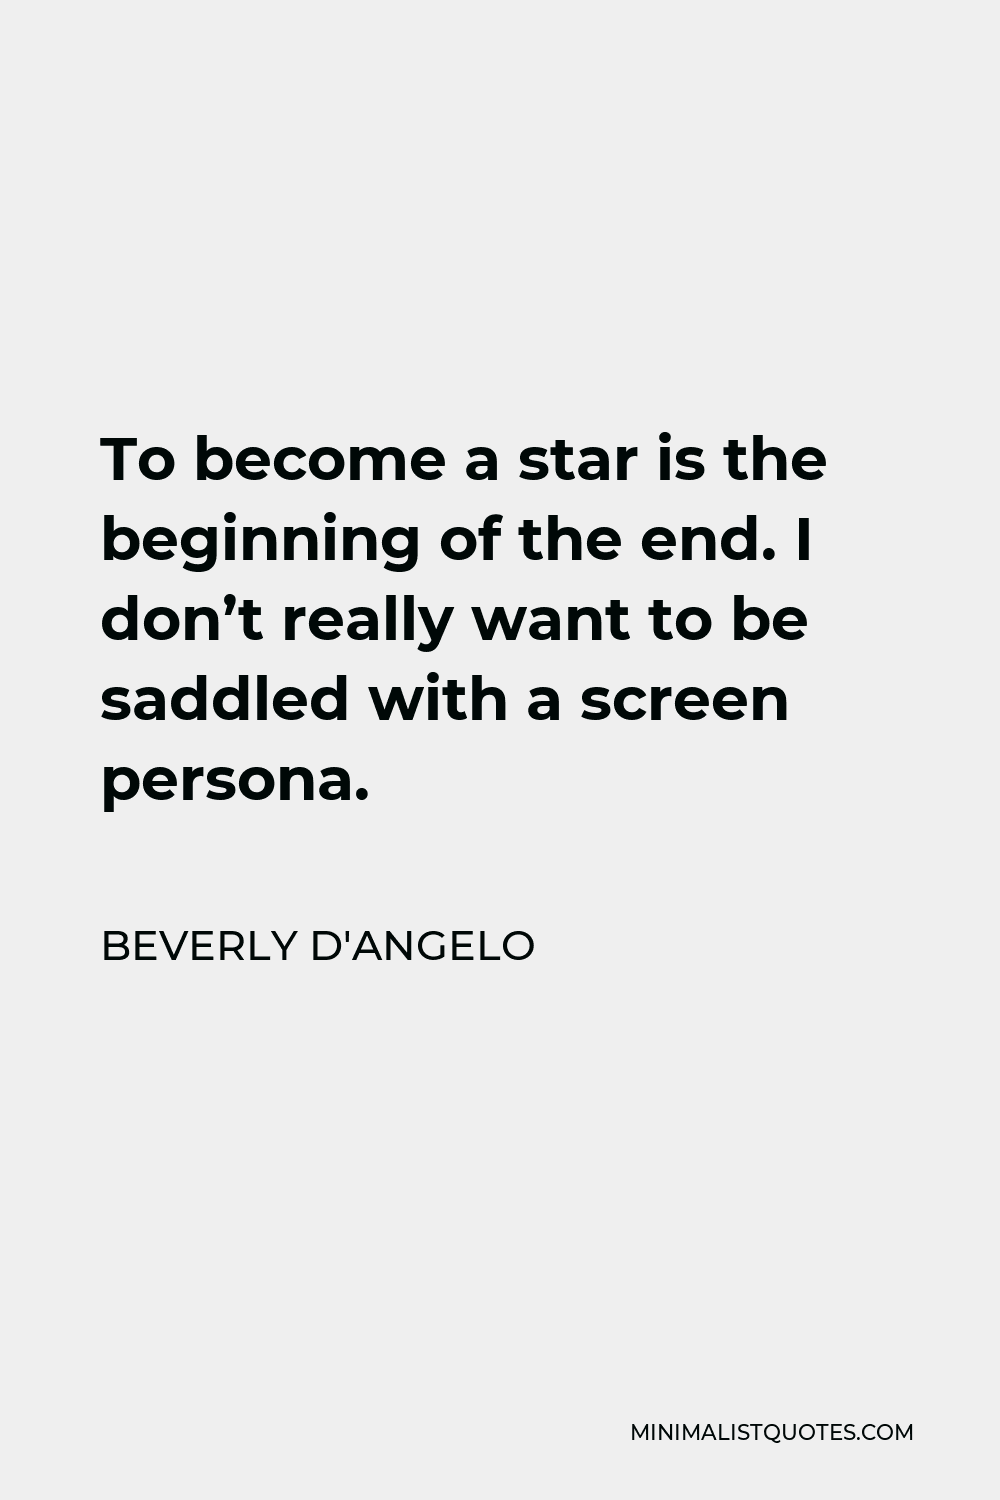 Beverly D'Angelo Quote - To become a star is the beginning of the end. I don’t really want to be saddled with a screen persona.